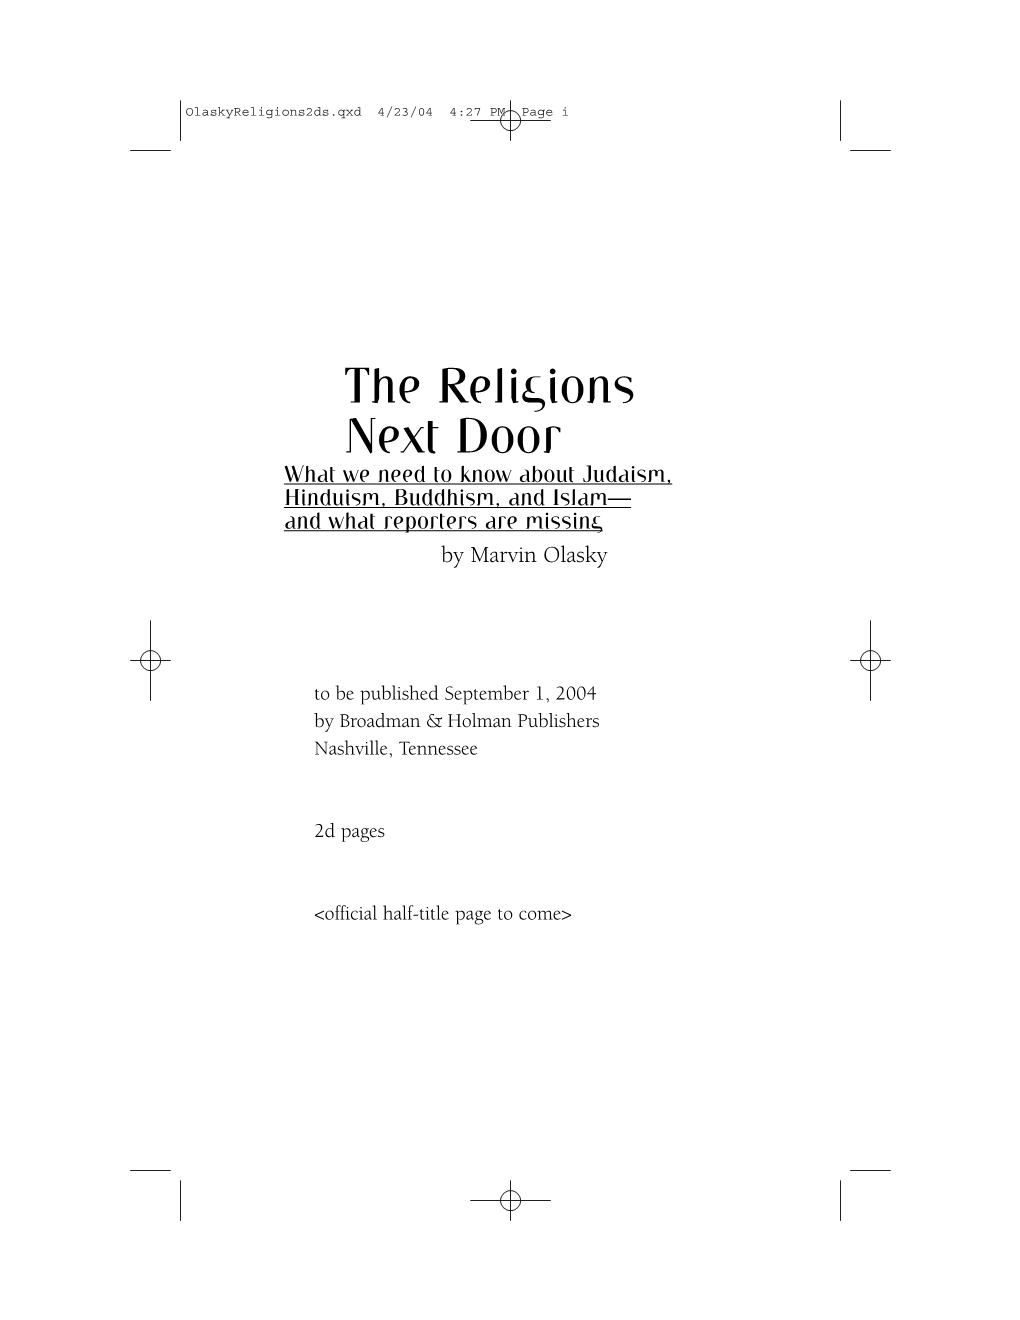 The Religions Next Door What We Need to Know About Judaism, Hinduism, Buddhism, and Islam— and What Reporters Are Missing by Marvin Olasky